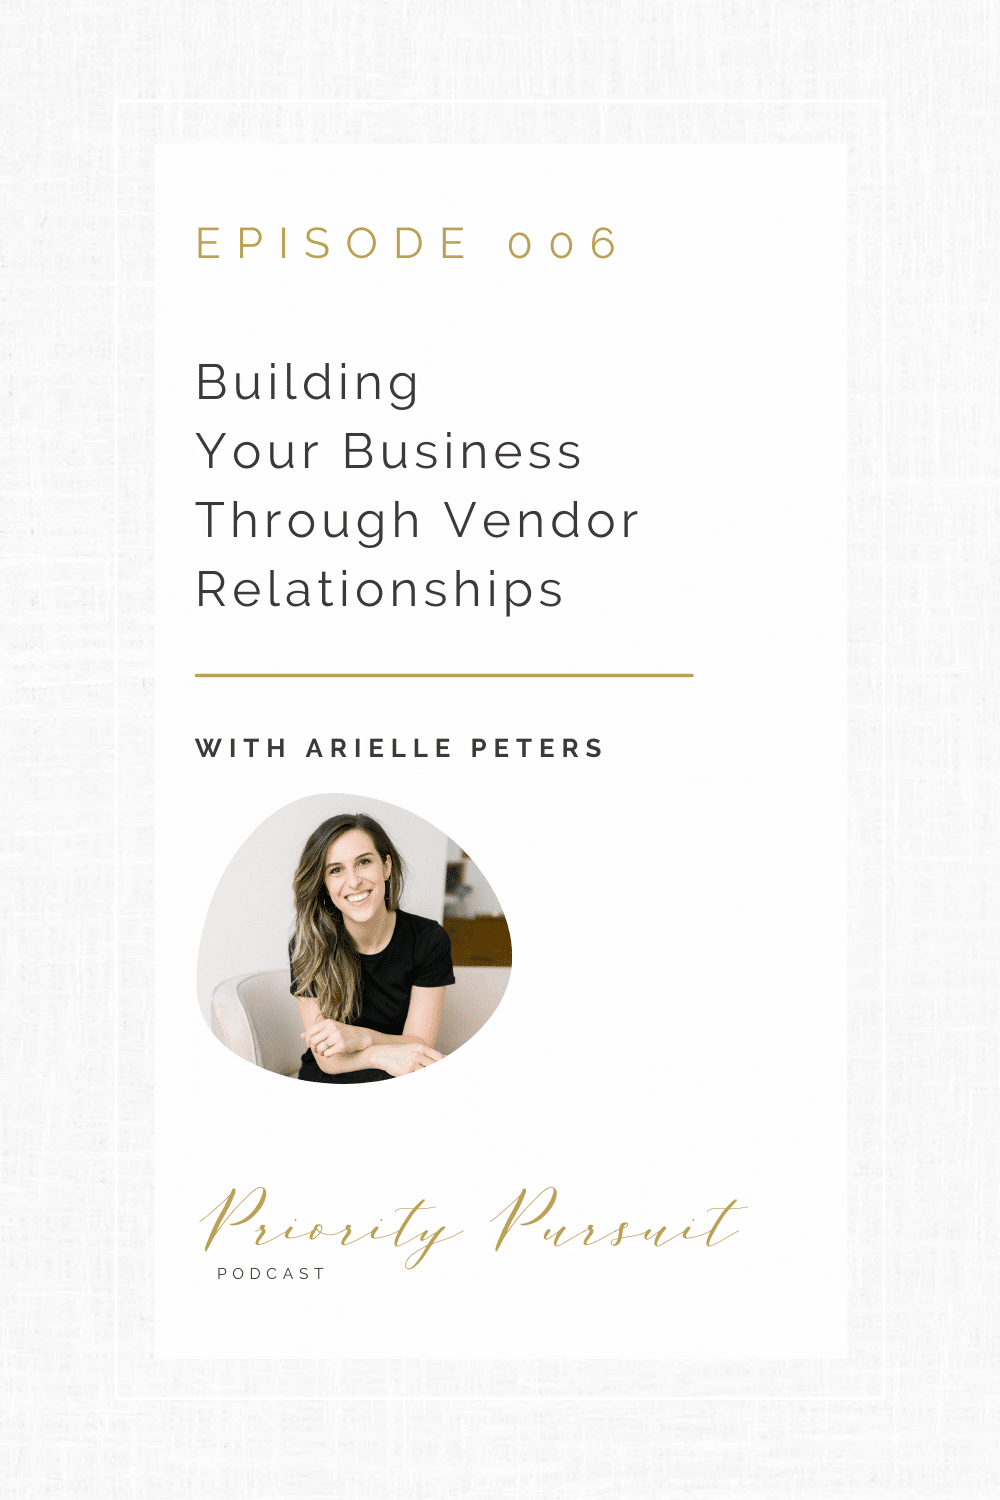 South Bend, Indiana Wedding Photographer Arielle Peters of Arielle Peters Photography explains how you can build your business through vendor relationships